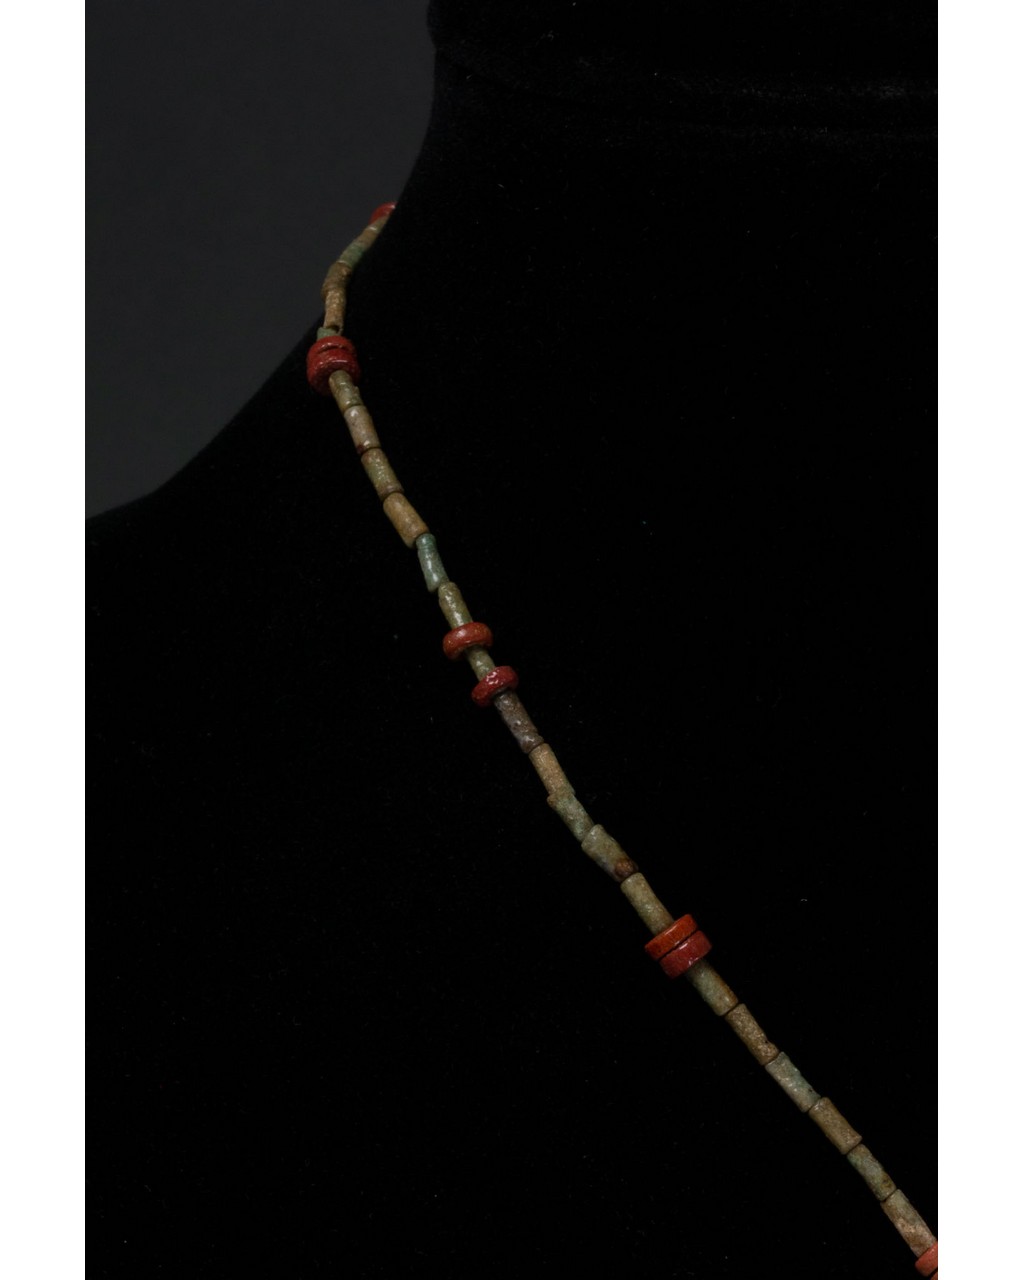 EGYPTIAN BEADED NECKLACE WITH AMULET - Image 4 of 7